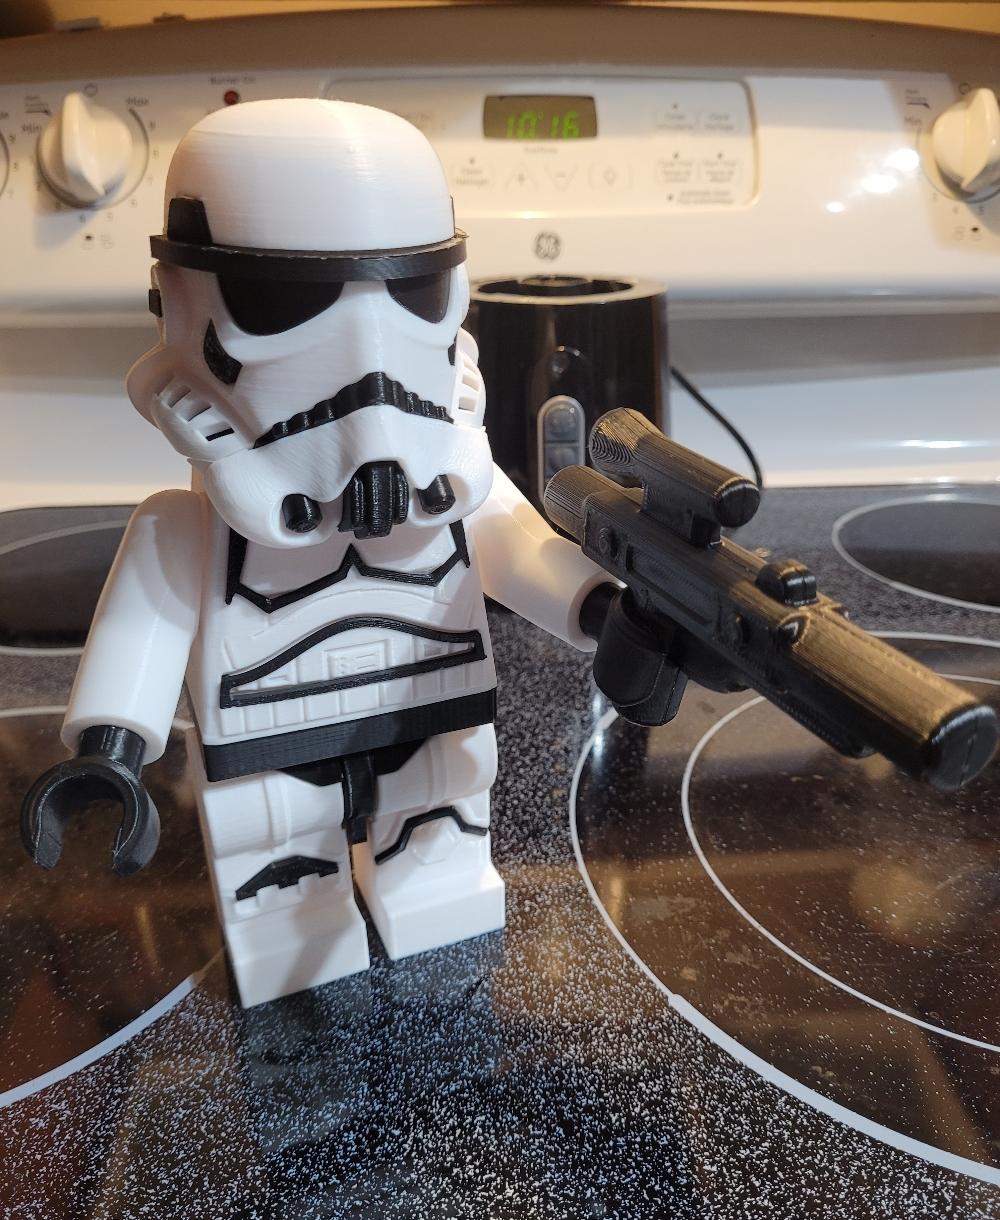 Stormtrooper (9 inch brick figure, NO MMU/AMS, NO supports, NO glue) - Really enjoyed building this! - 3d model